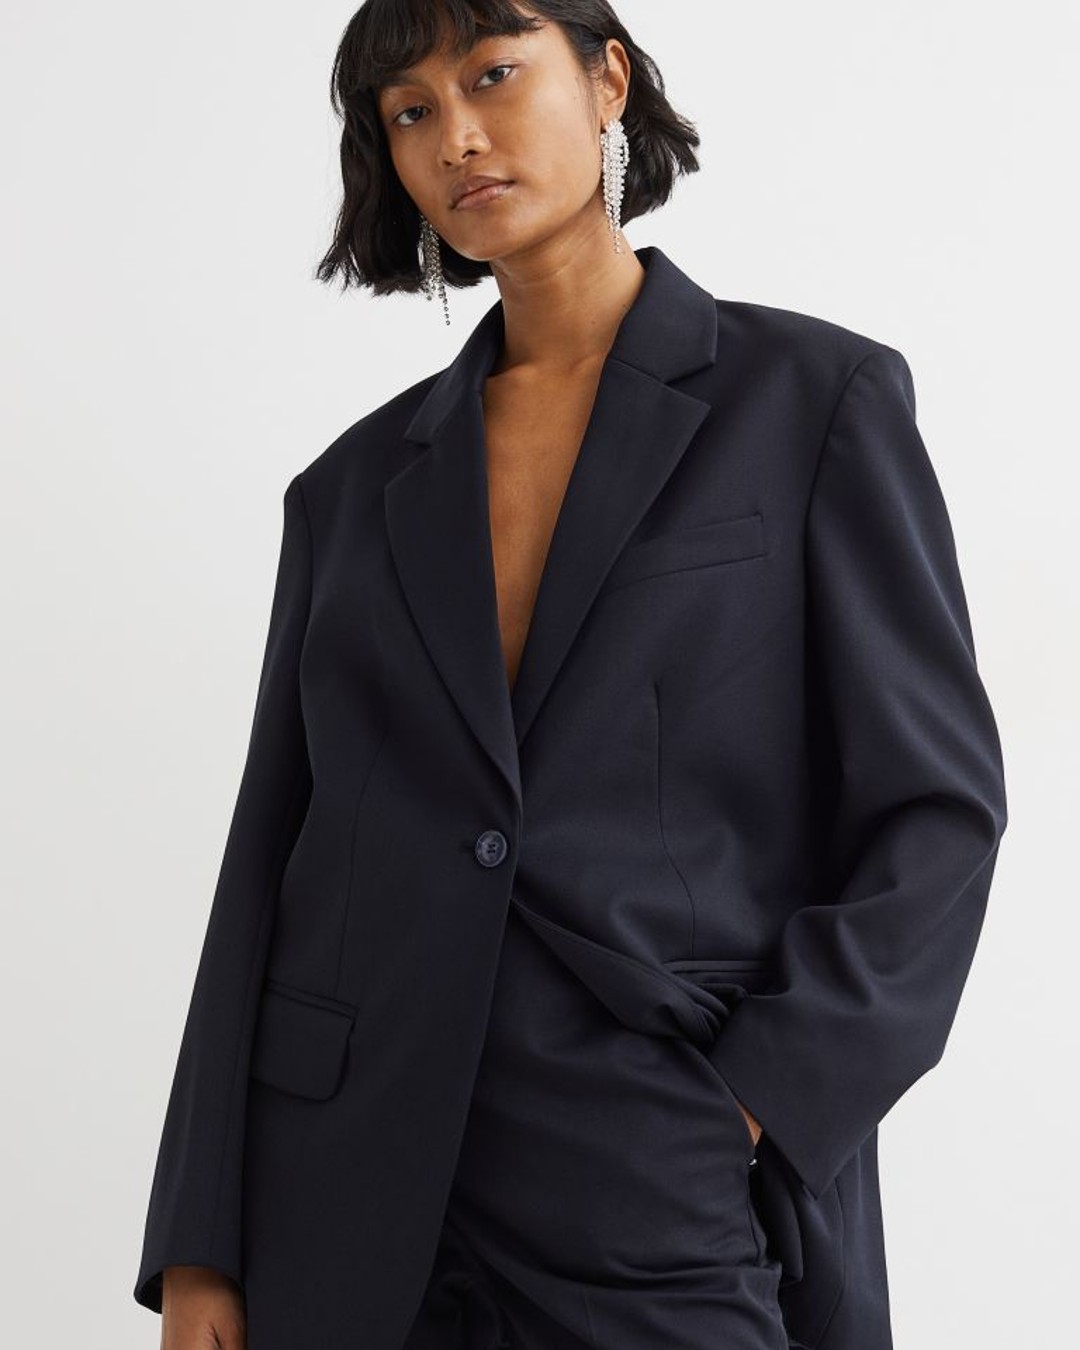 The Best Blazers To Round Out Your Autumn Wardrobe | URBAN LIST GLOBAL